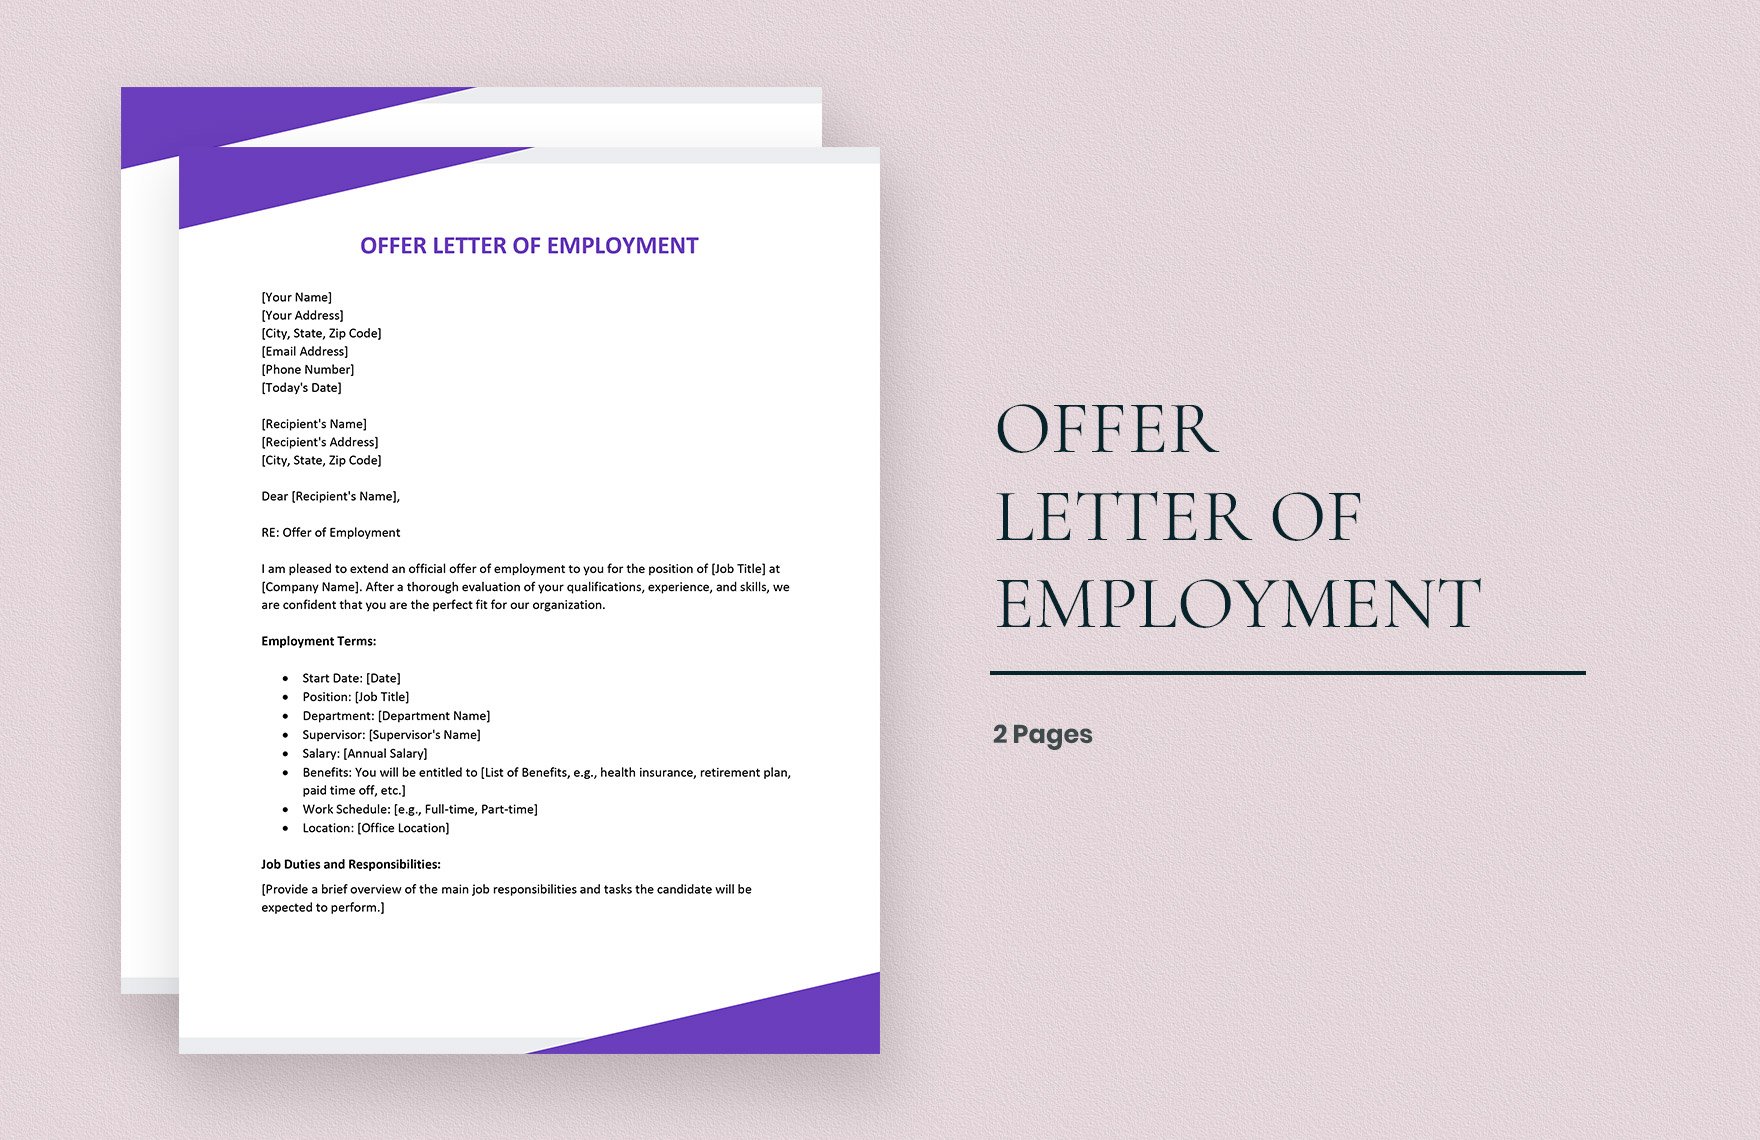 Free Offer Letter of Employment